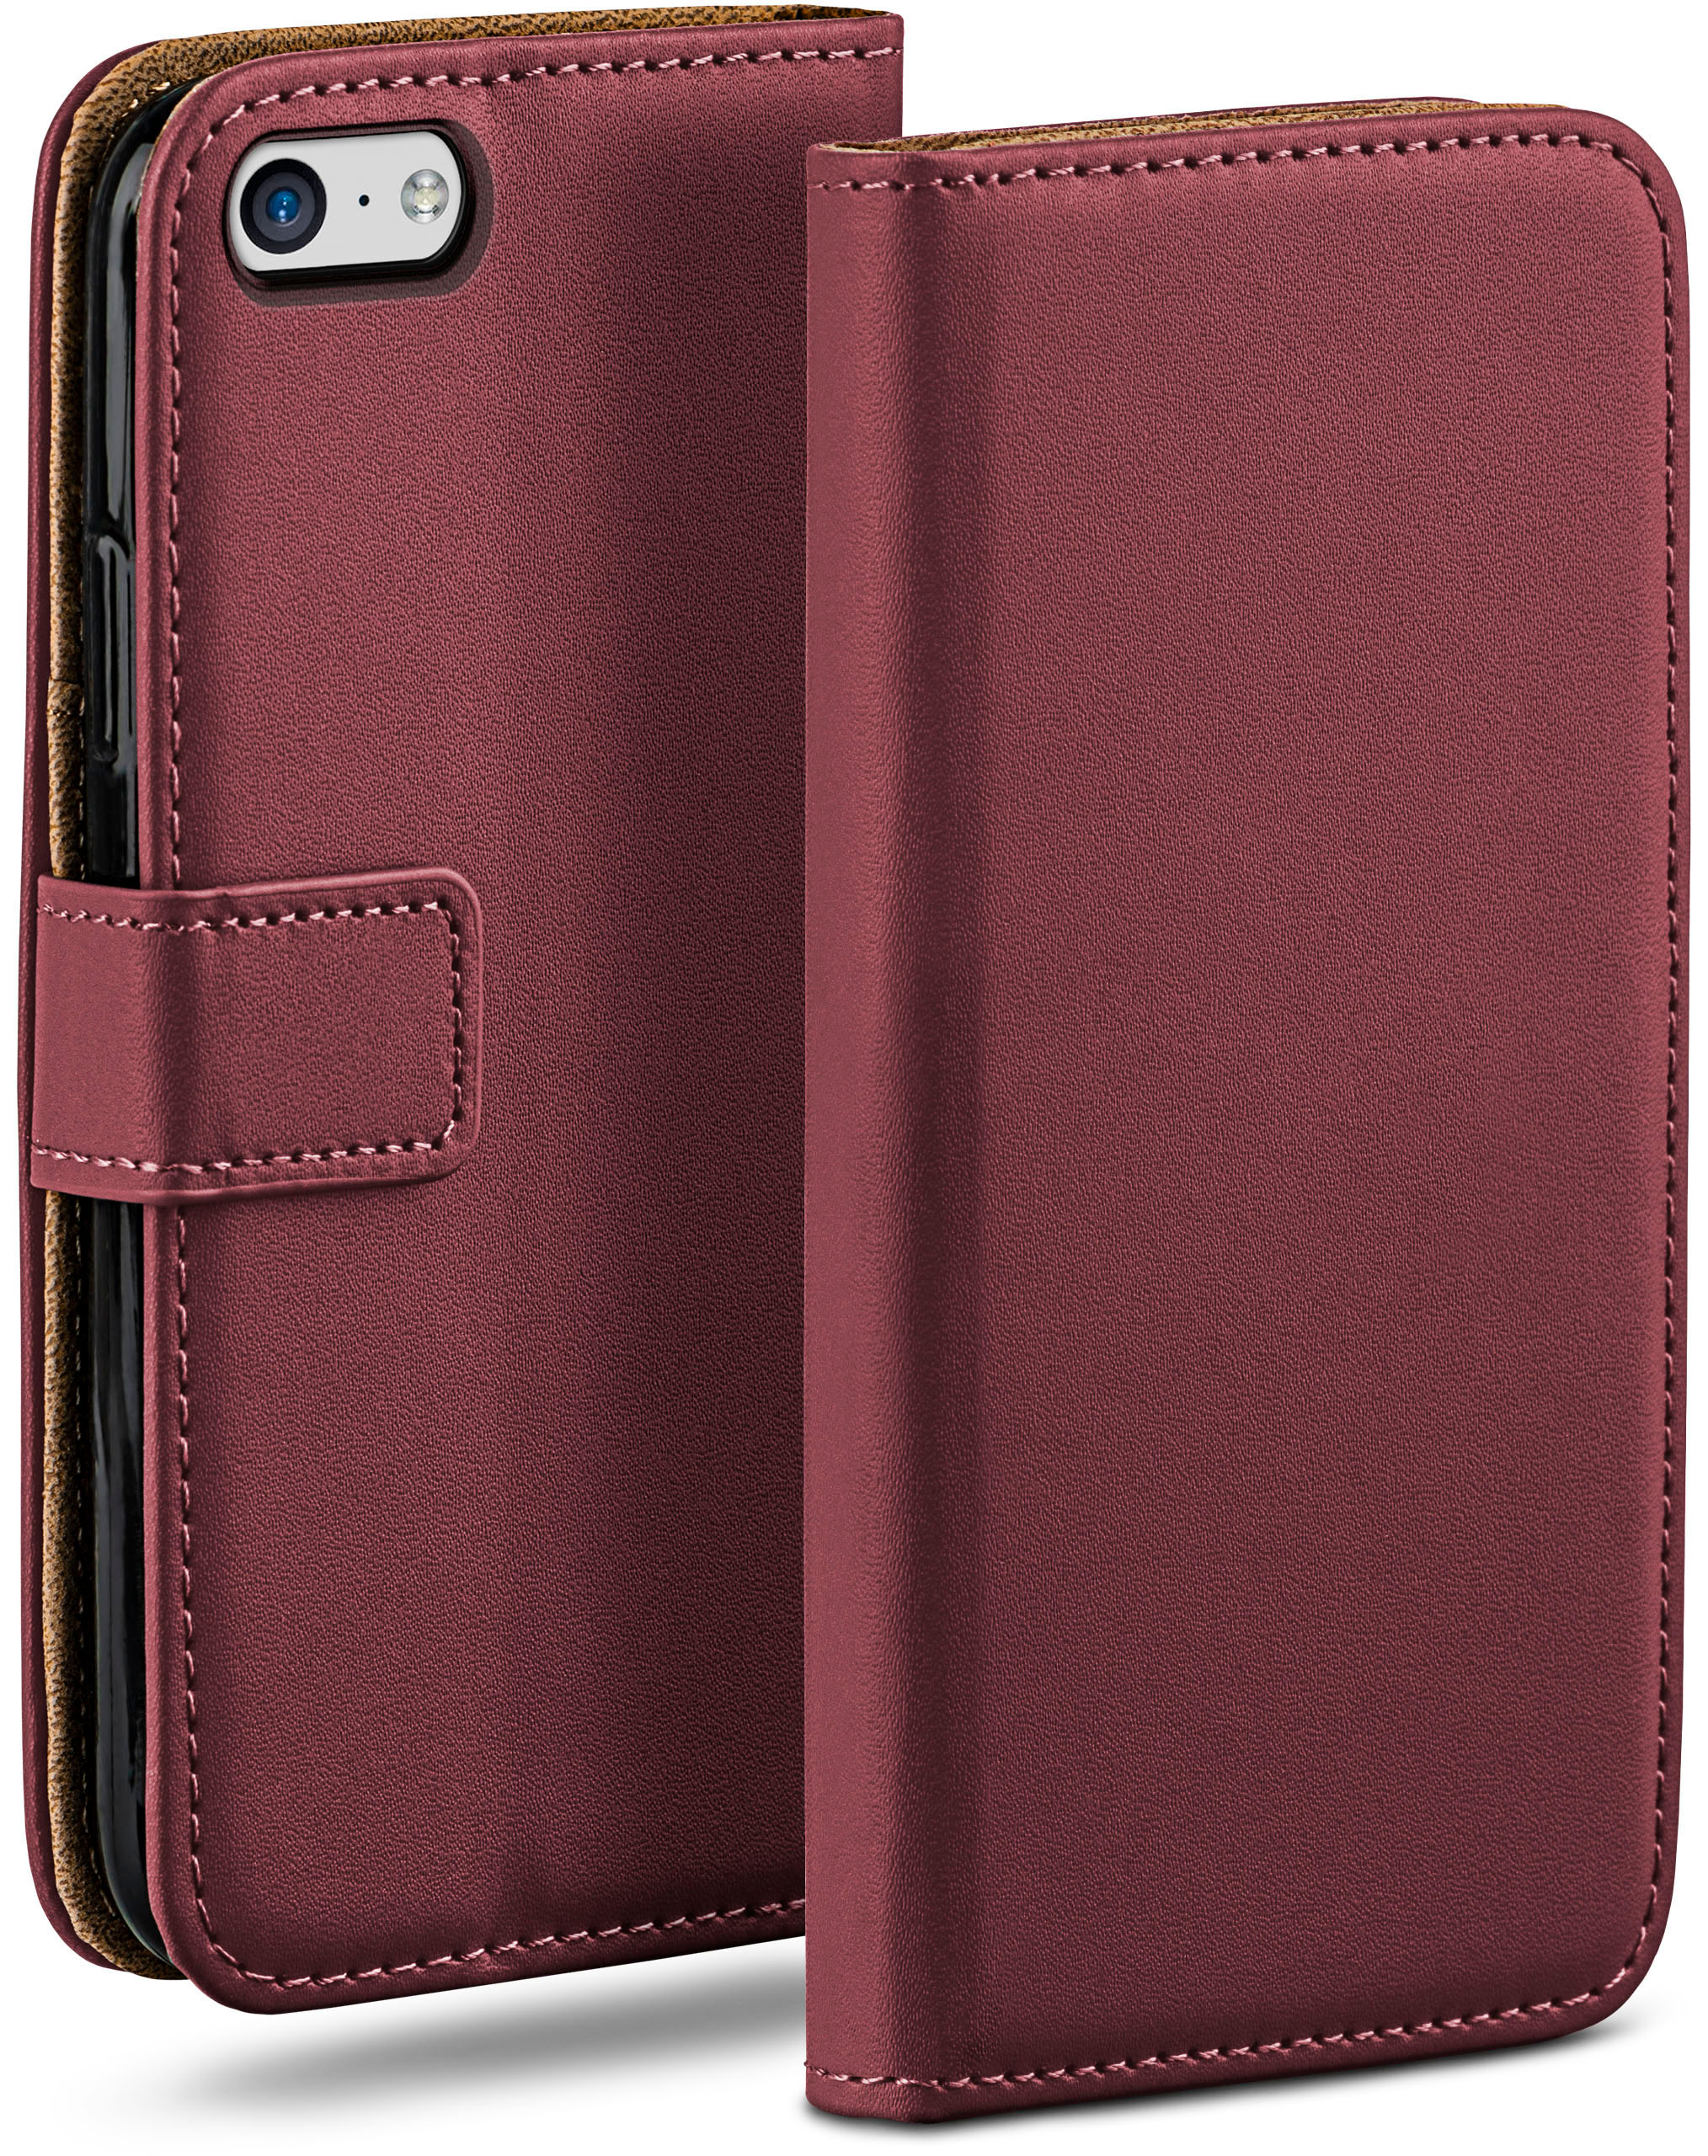 MOEX Book Maroon-Red Bookcover, 5c, Case, Apple, iPhone